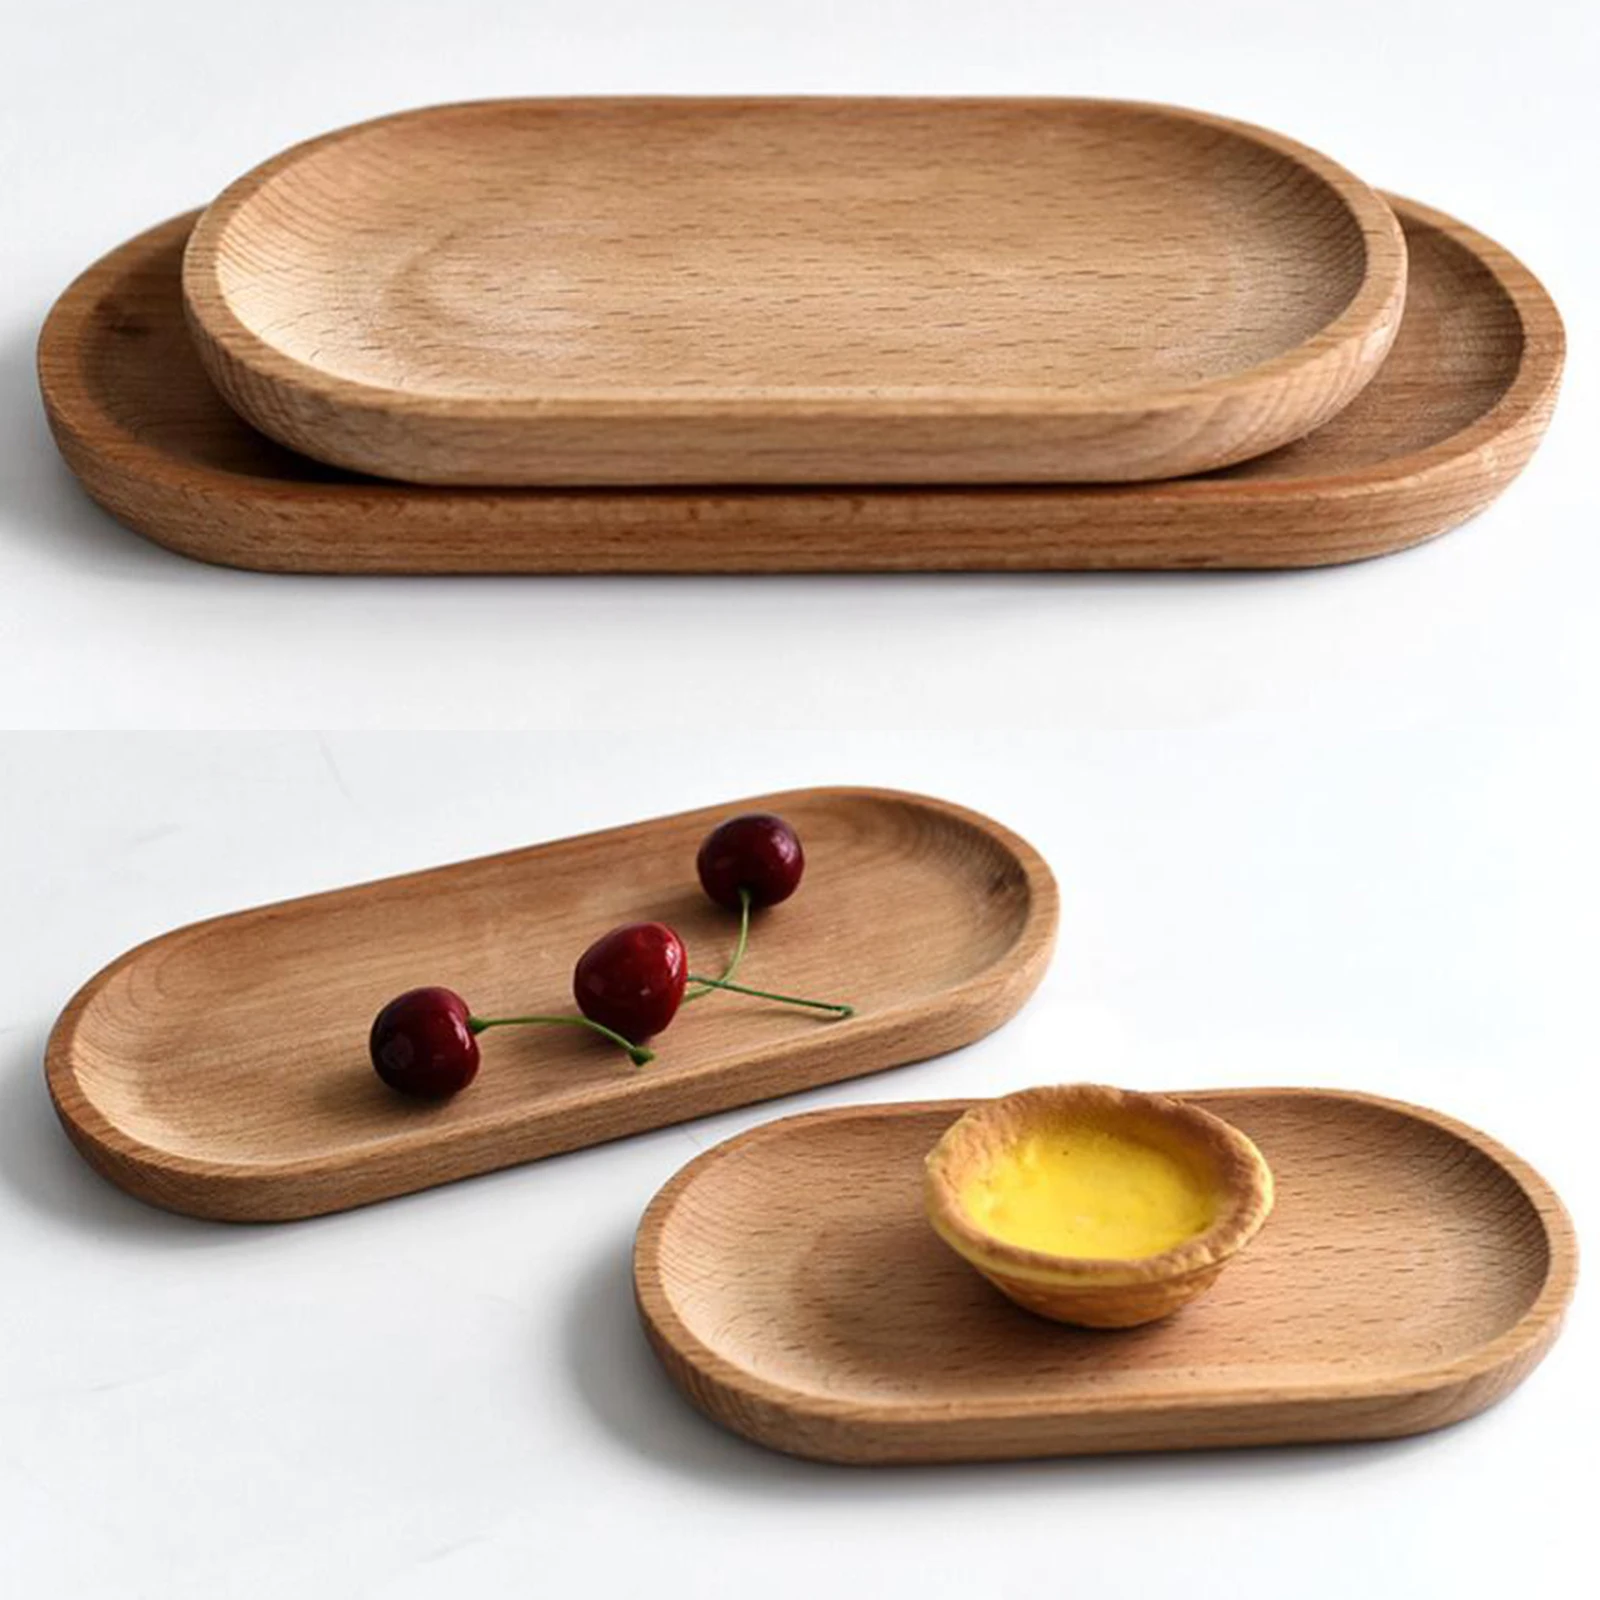 Madouda Natural Round Wood Tray Reusable Wood Plates Serving Tray Elegant Appetizer Plates Party Dinner Plates Steak Plate Coffee Tea Serving Tray 11X 11 Inches 